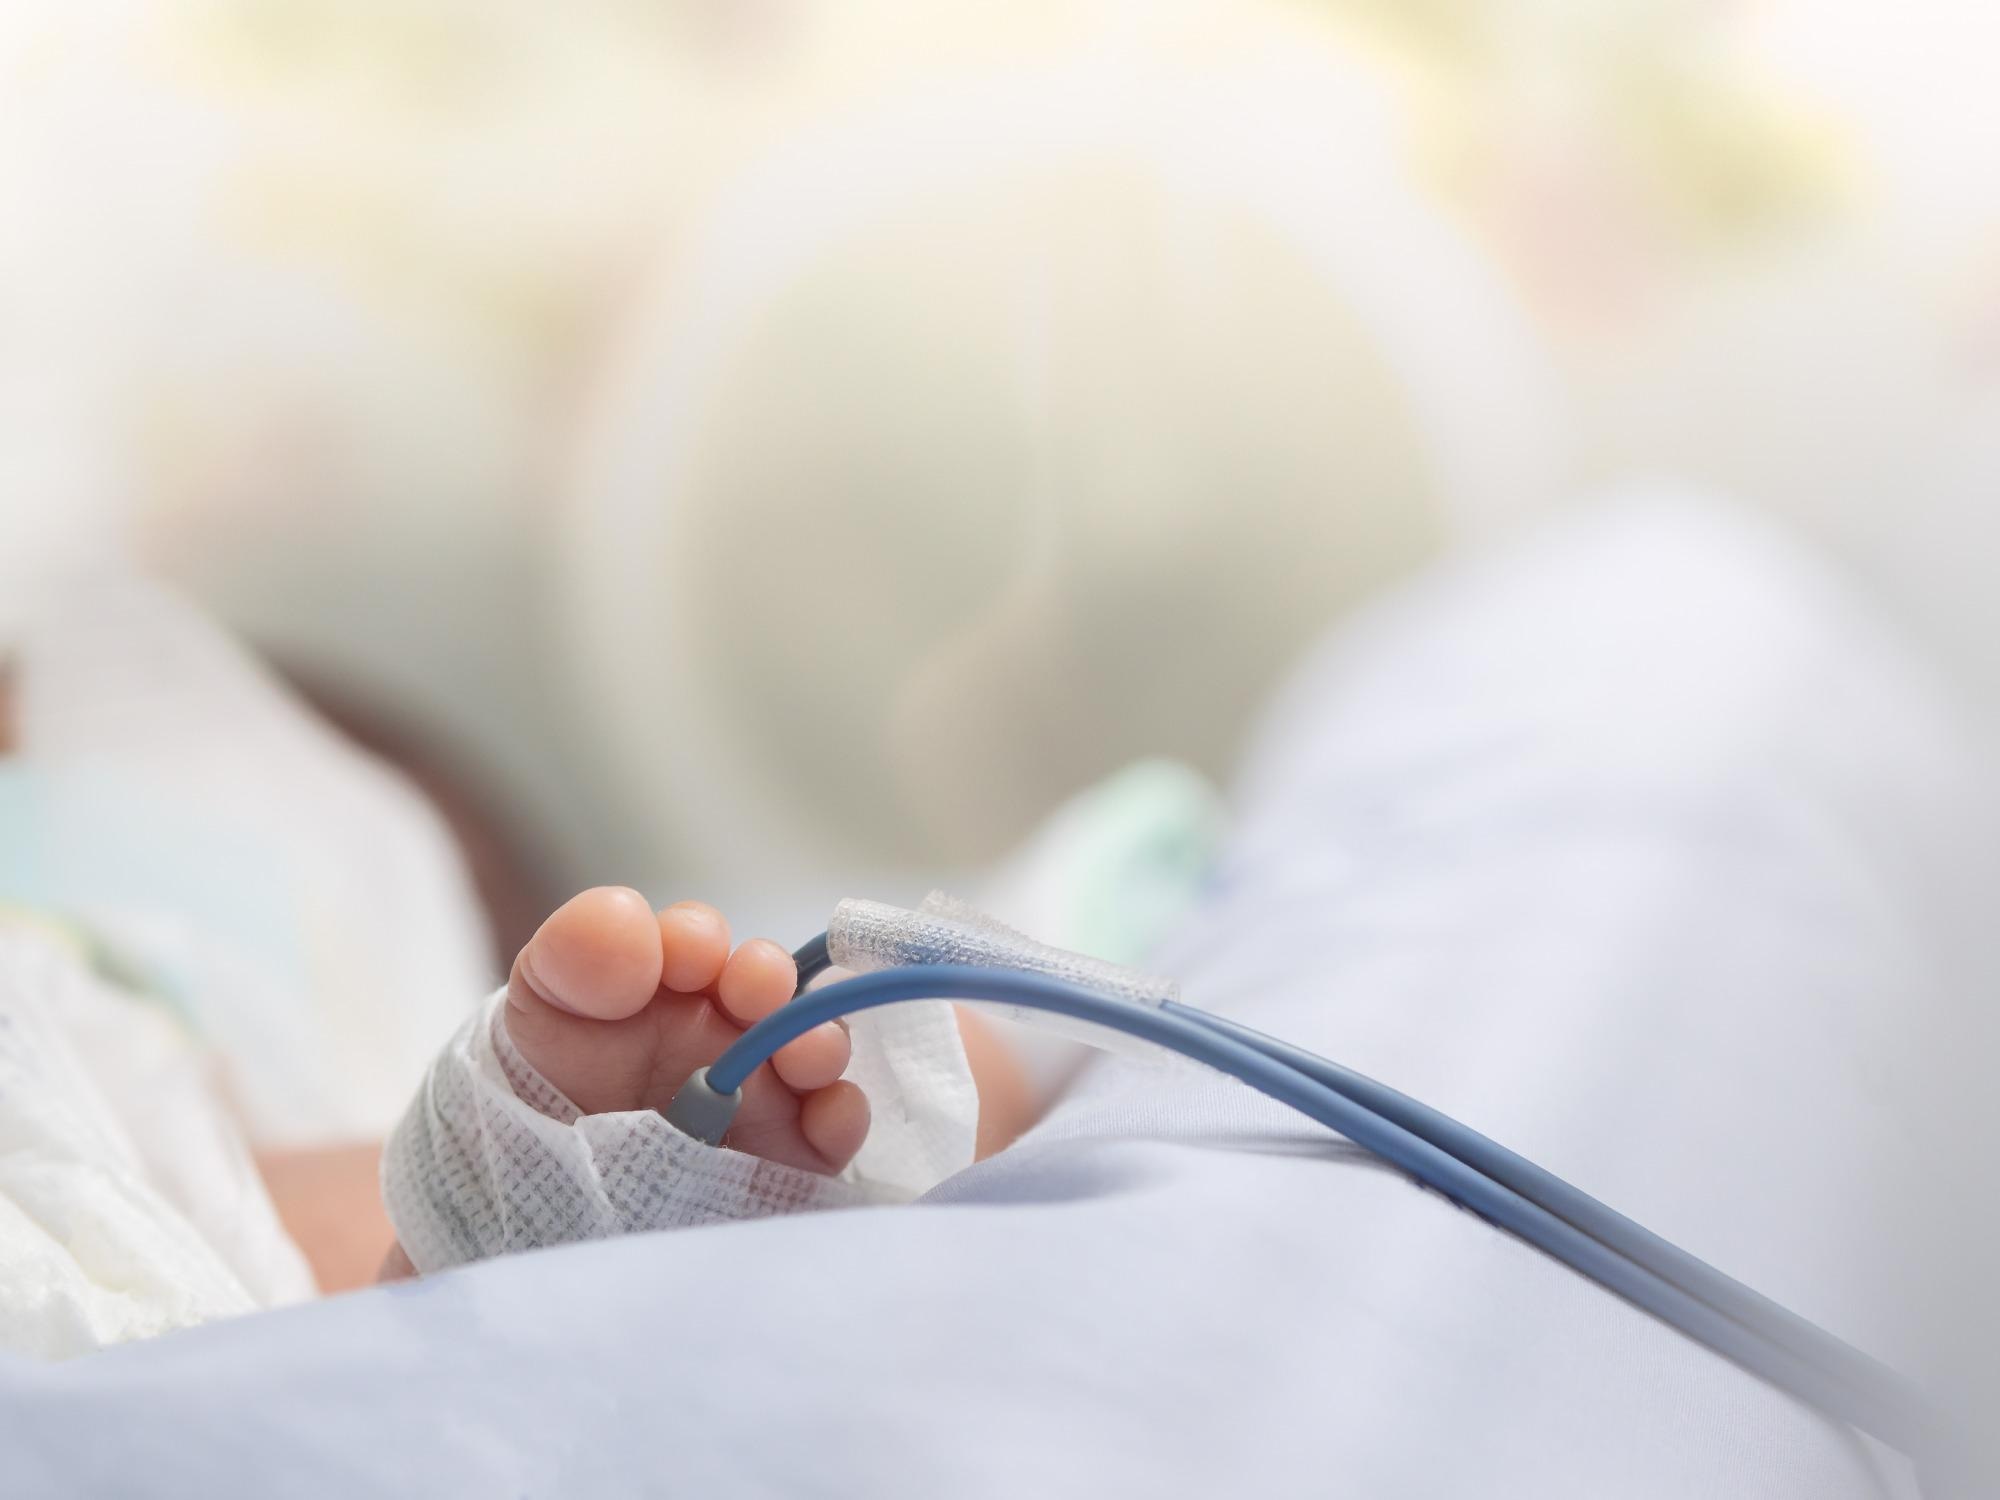 Study: Neonatal outcomes and indirect consequences following maternal SARS-CoV-2 infection in pregnancy: A systematic review. Image Credit: StockKK / Shutterstock